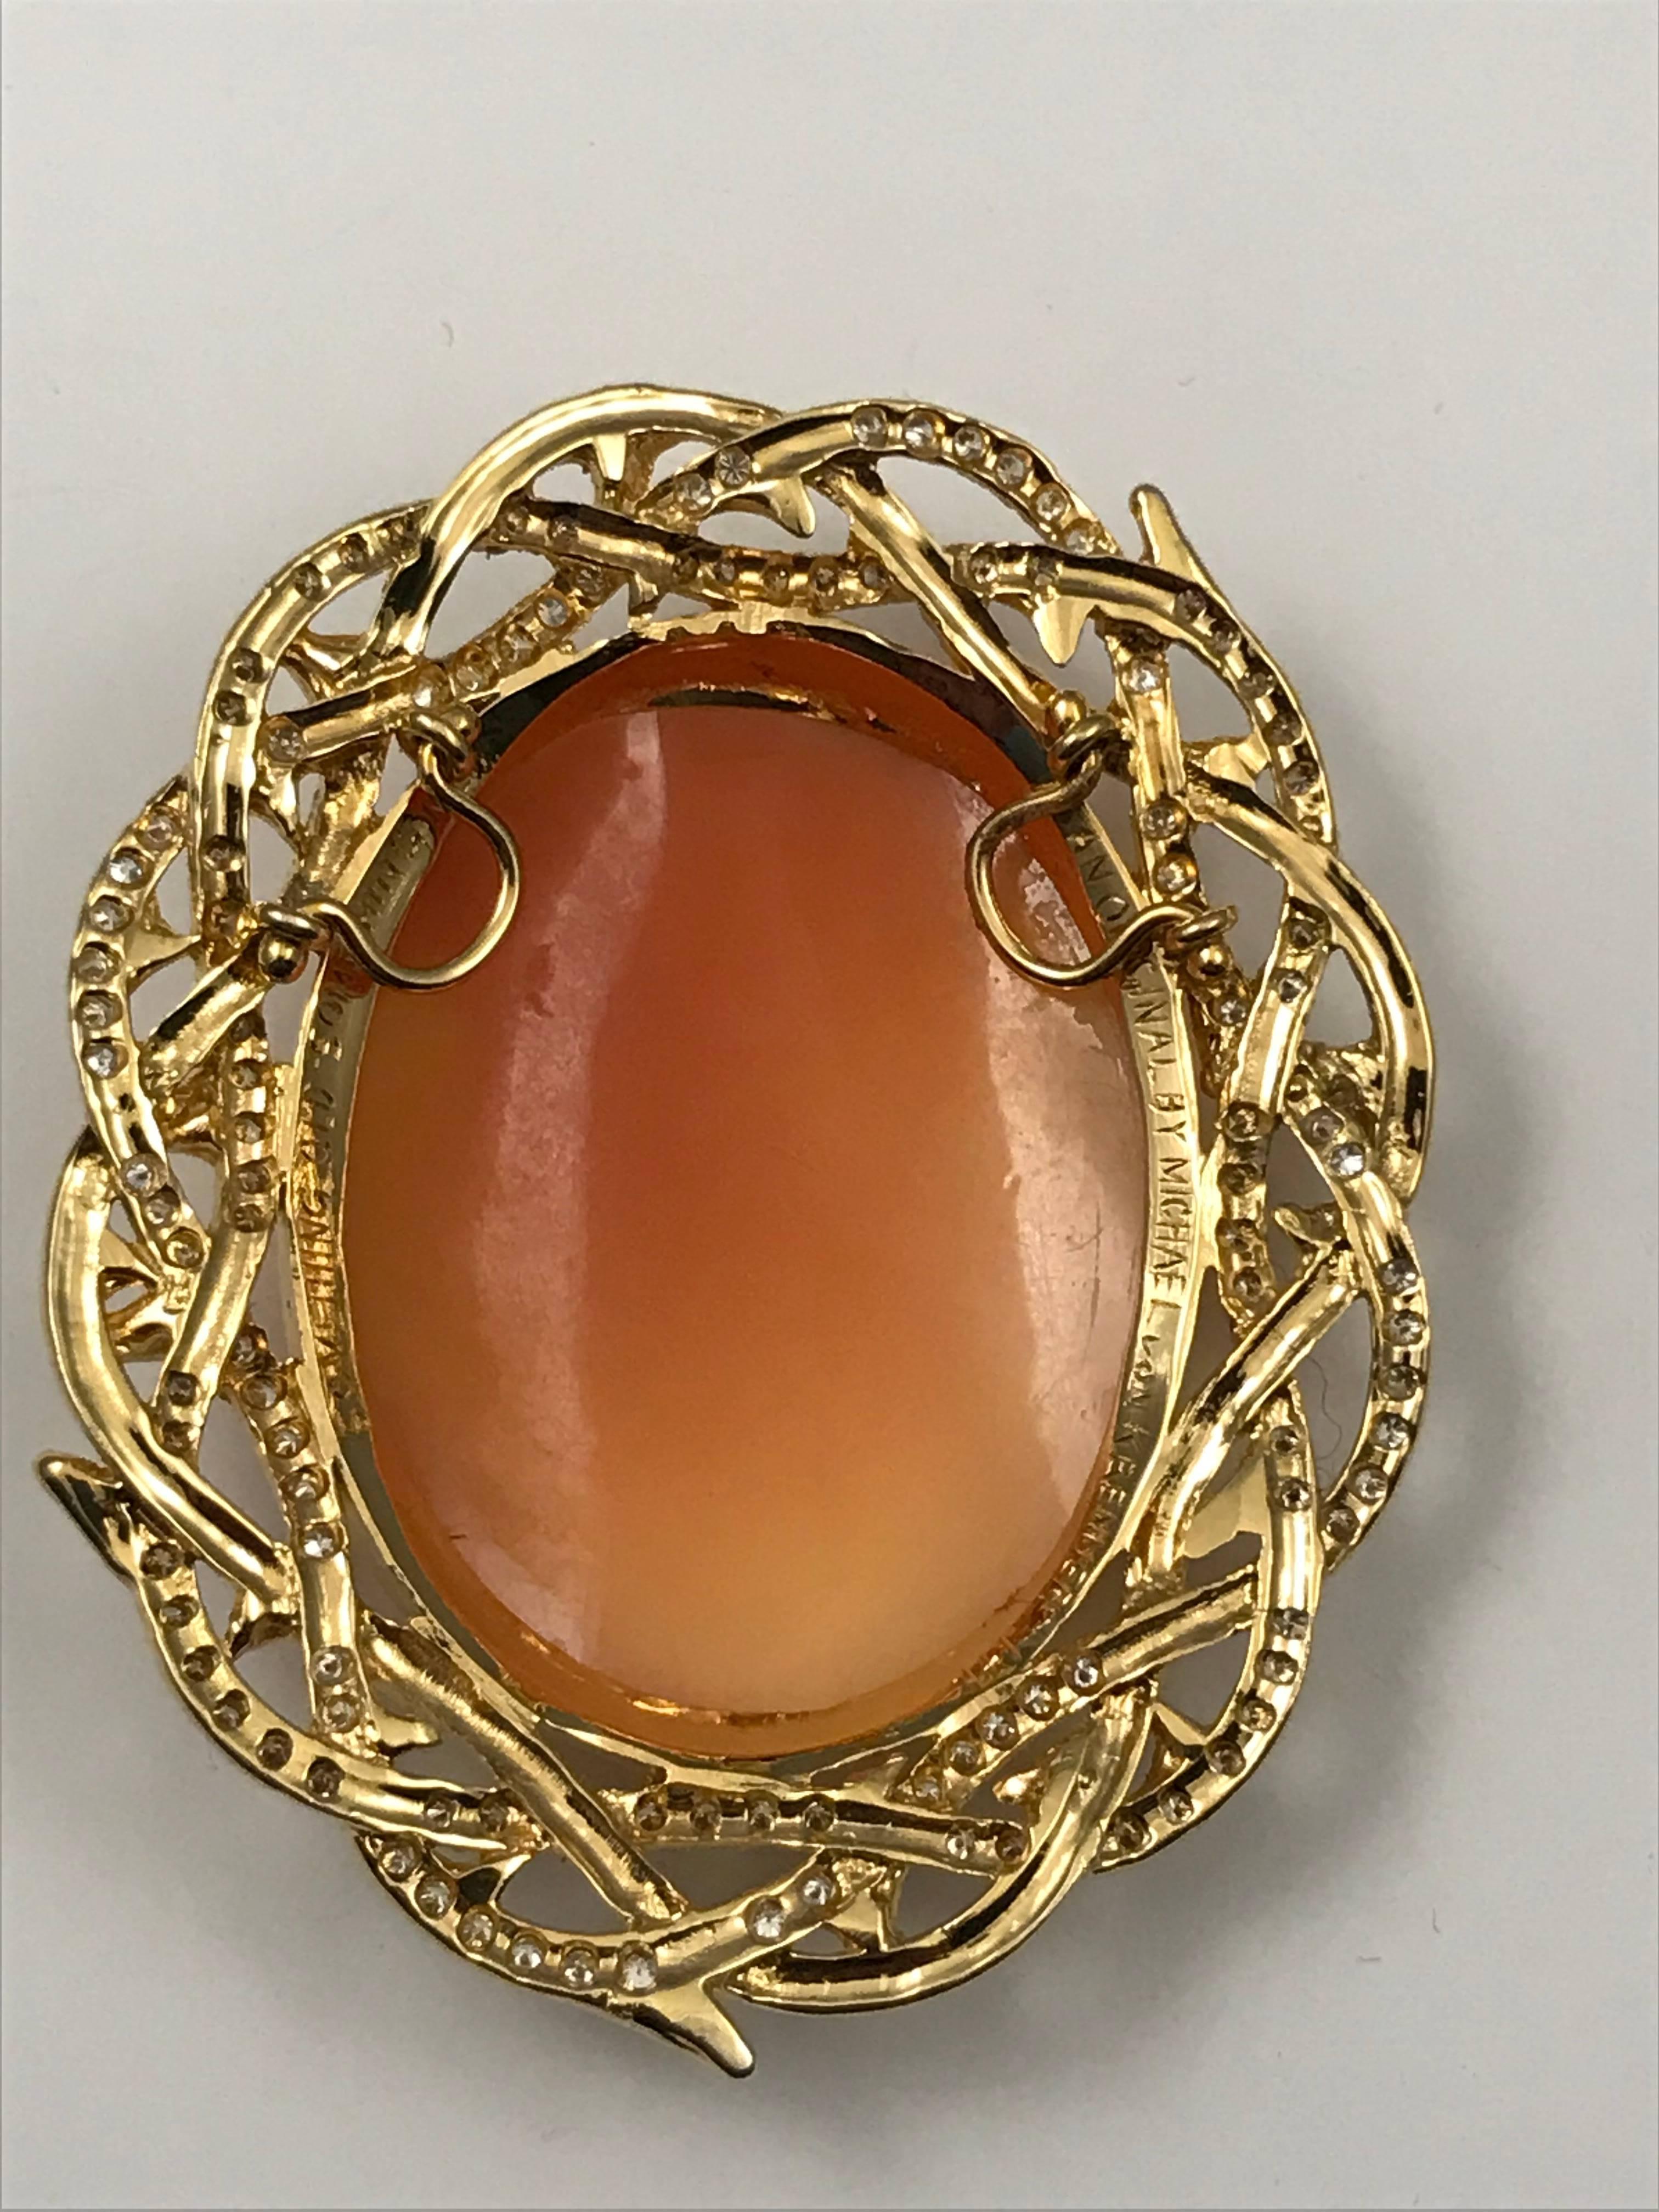 Cameo 1890s Jesus Set in 14 Karat Gold with Diamonds, Rubies and Brown Diamonds For Sale 6